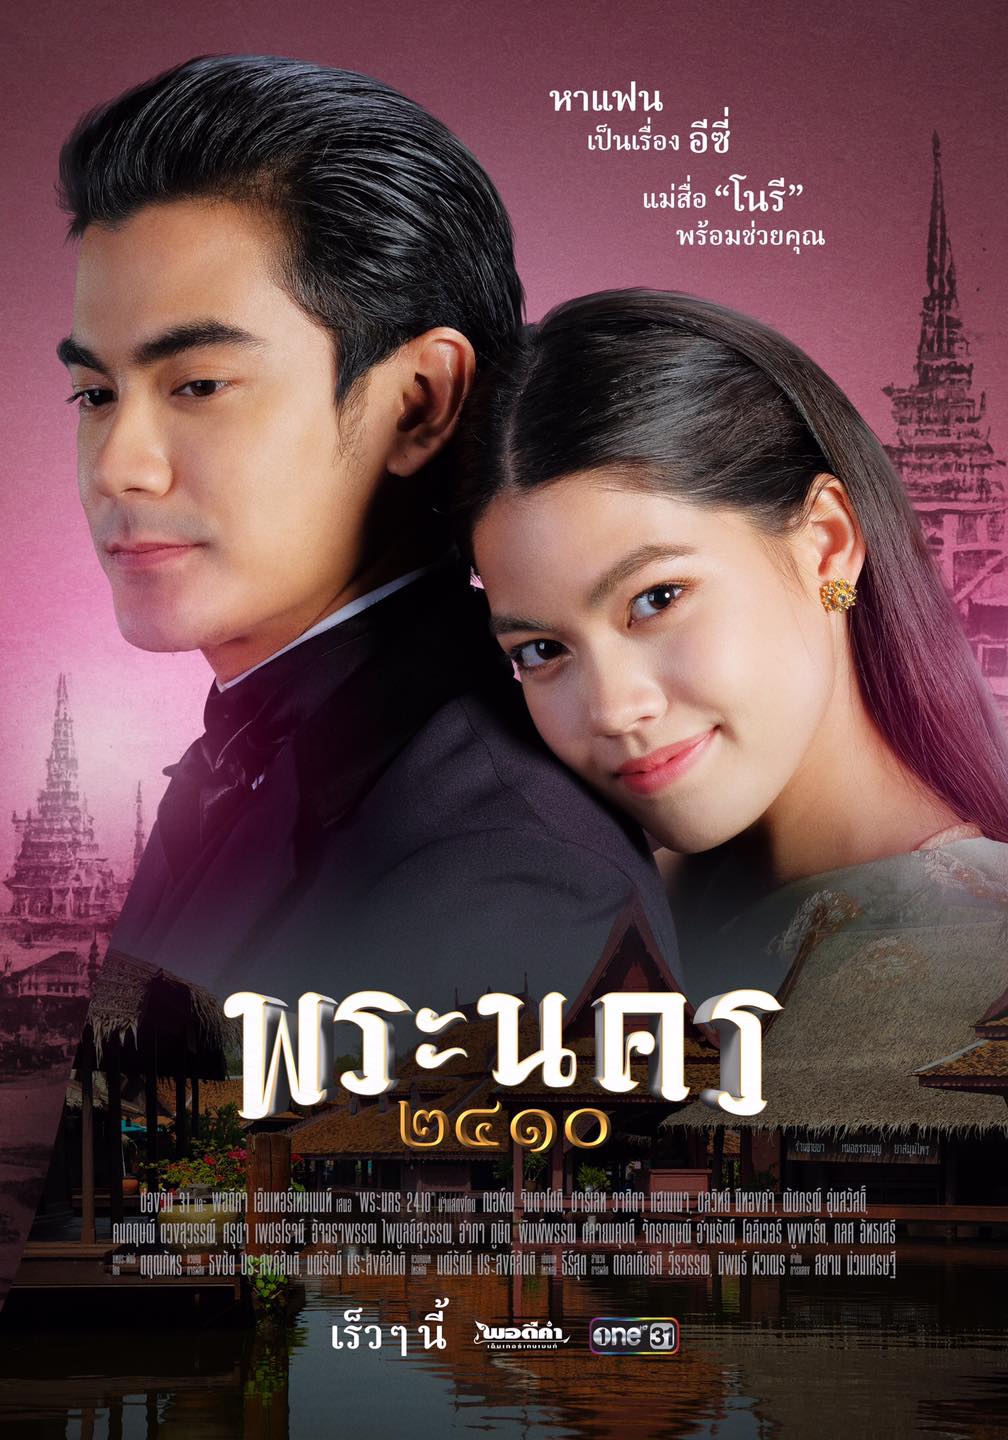 TV ratings for Phra Nakhon 2410 (พระนคร ๒๔๑๐) in Thailand. One31 TV series